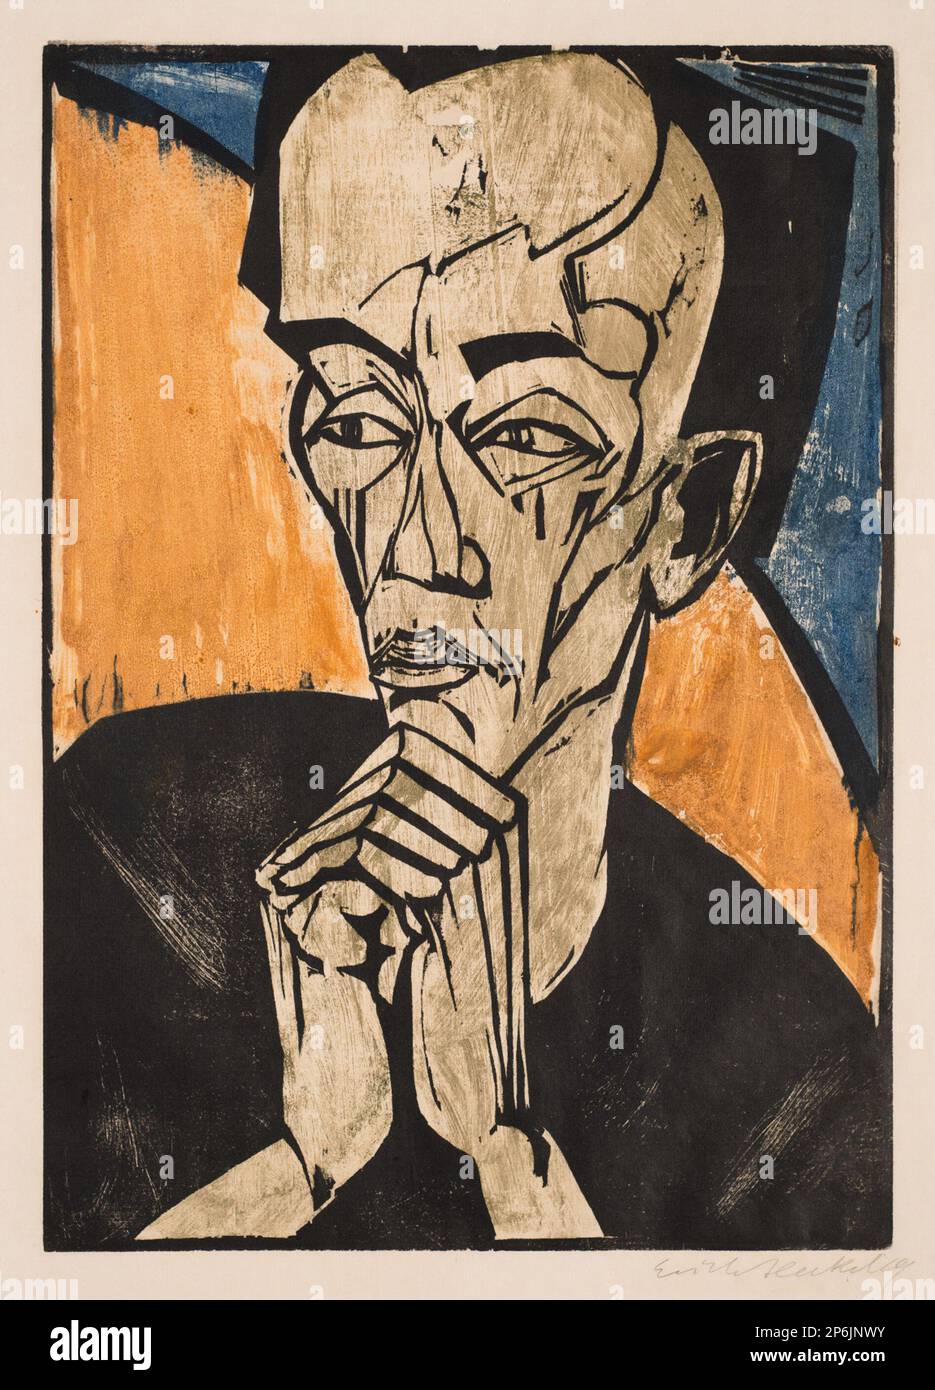 Erich Heckel, Portrait of a Man, 1918, Color woodcut, over zincograph, in green, blue, ochre and black on paper. Stock Photo